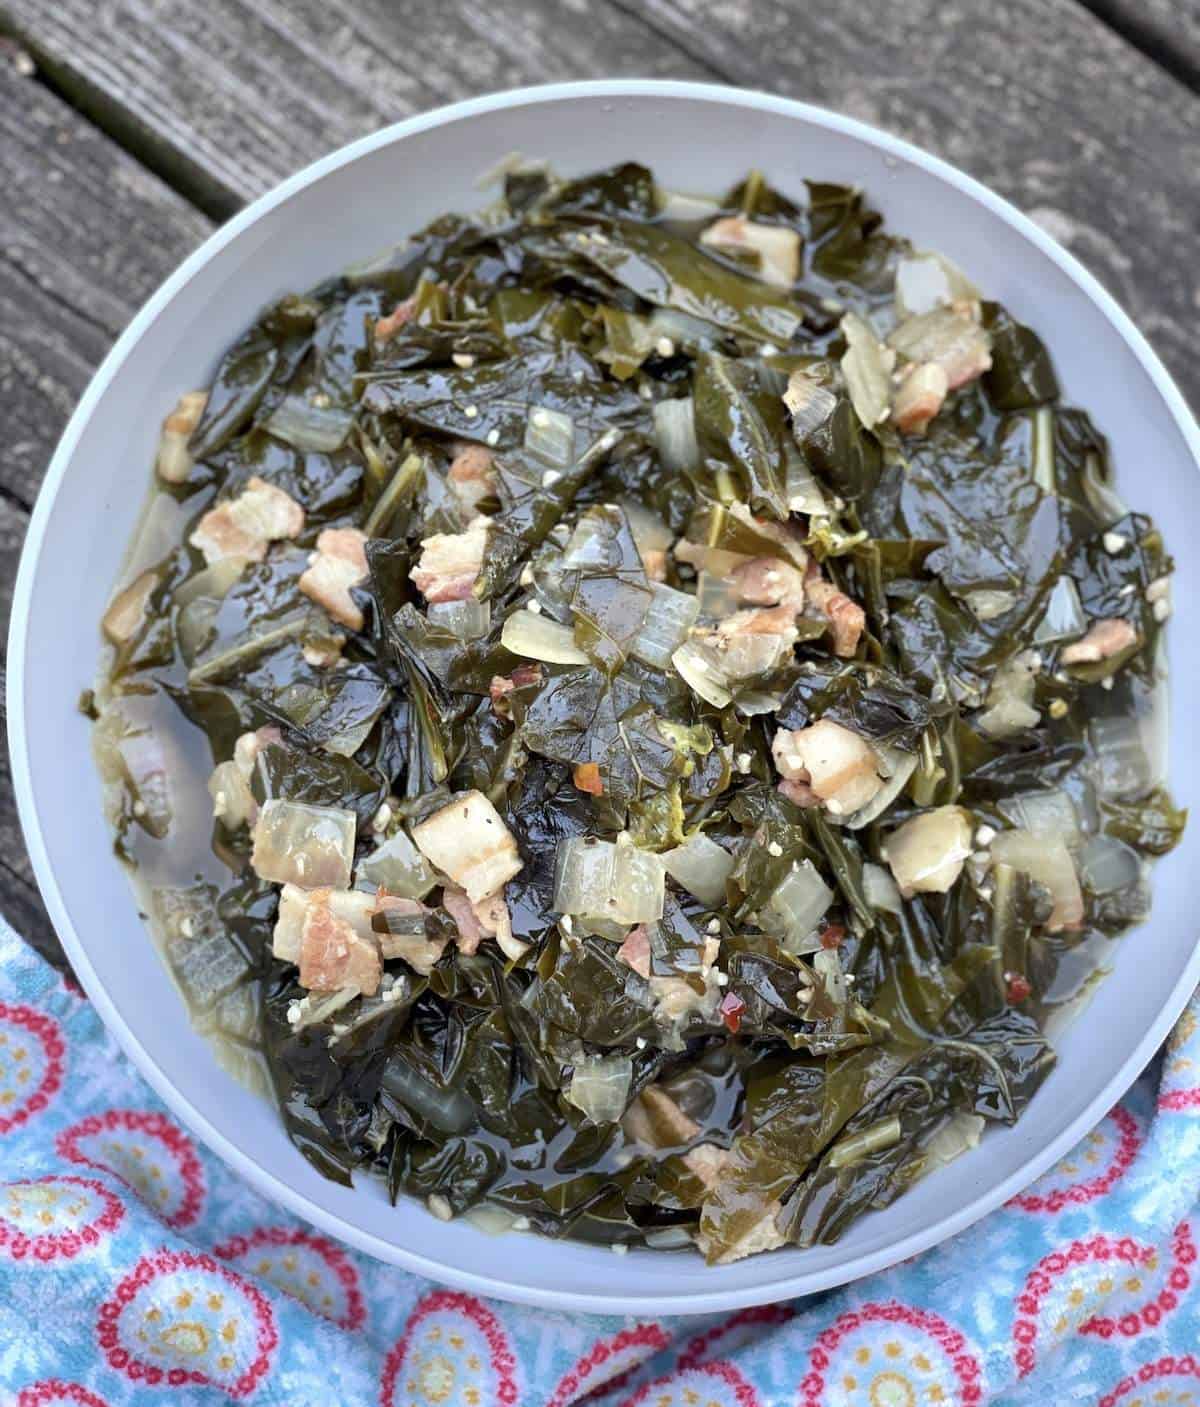 A bowl of collard greens with smoked turkey on a wood background with a floral towel.